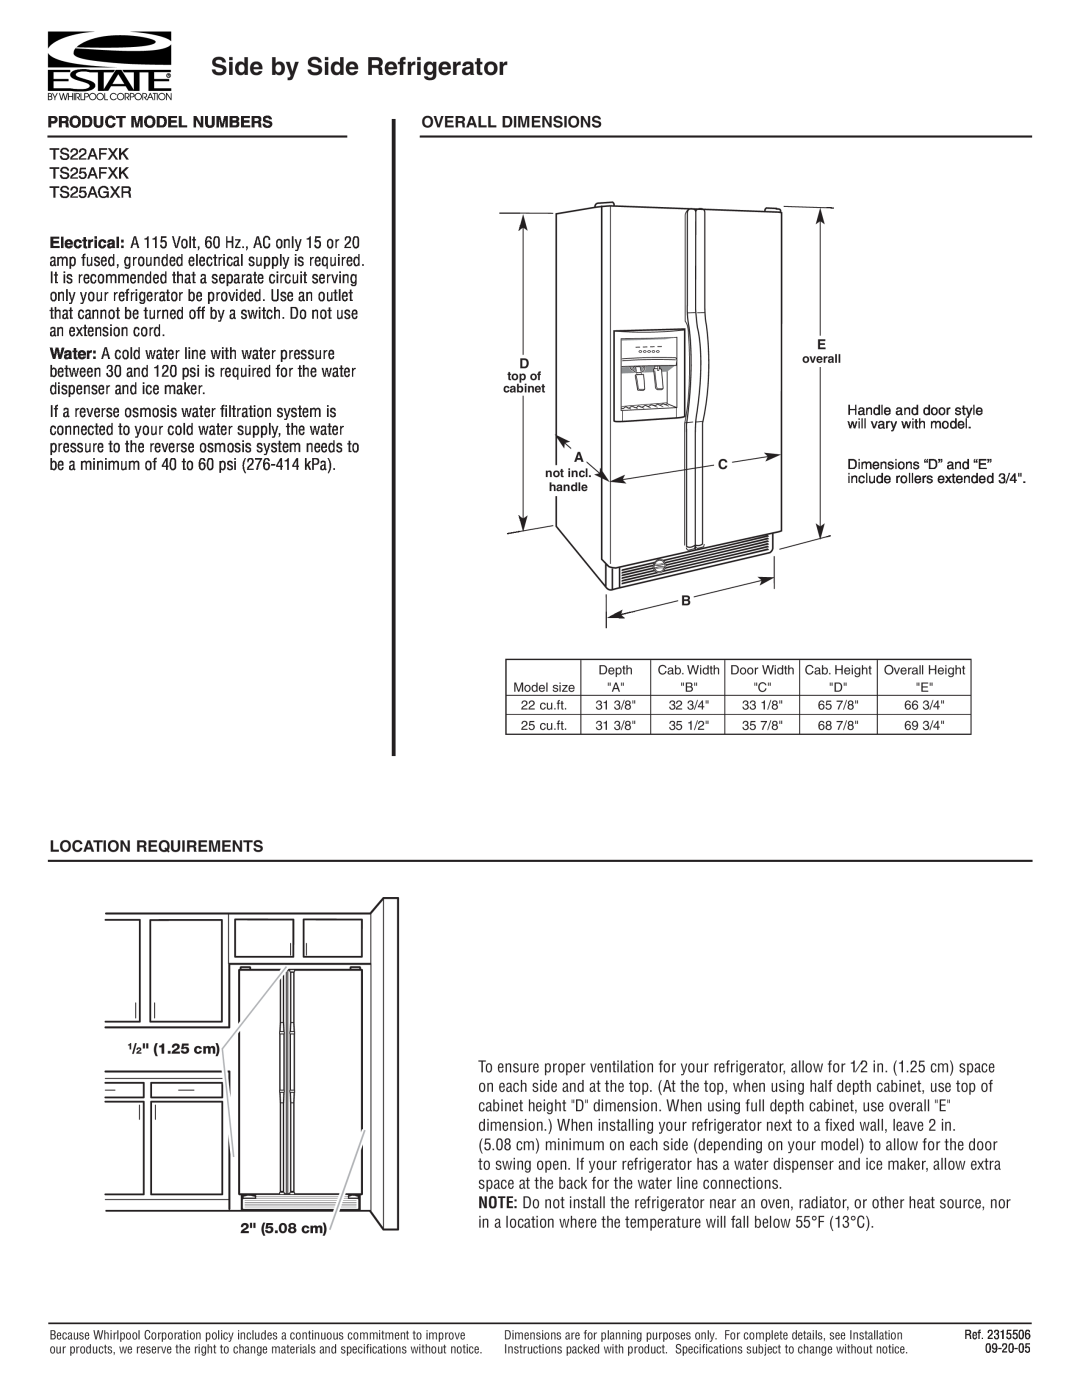 Estate TS25AFXK dimensions Side by Side Refrigerator, Product Model Numbers, Overall Dimensions, Location Requirements 